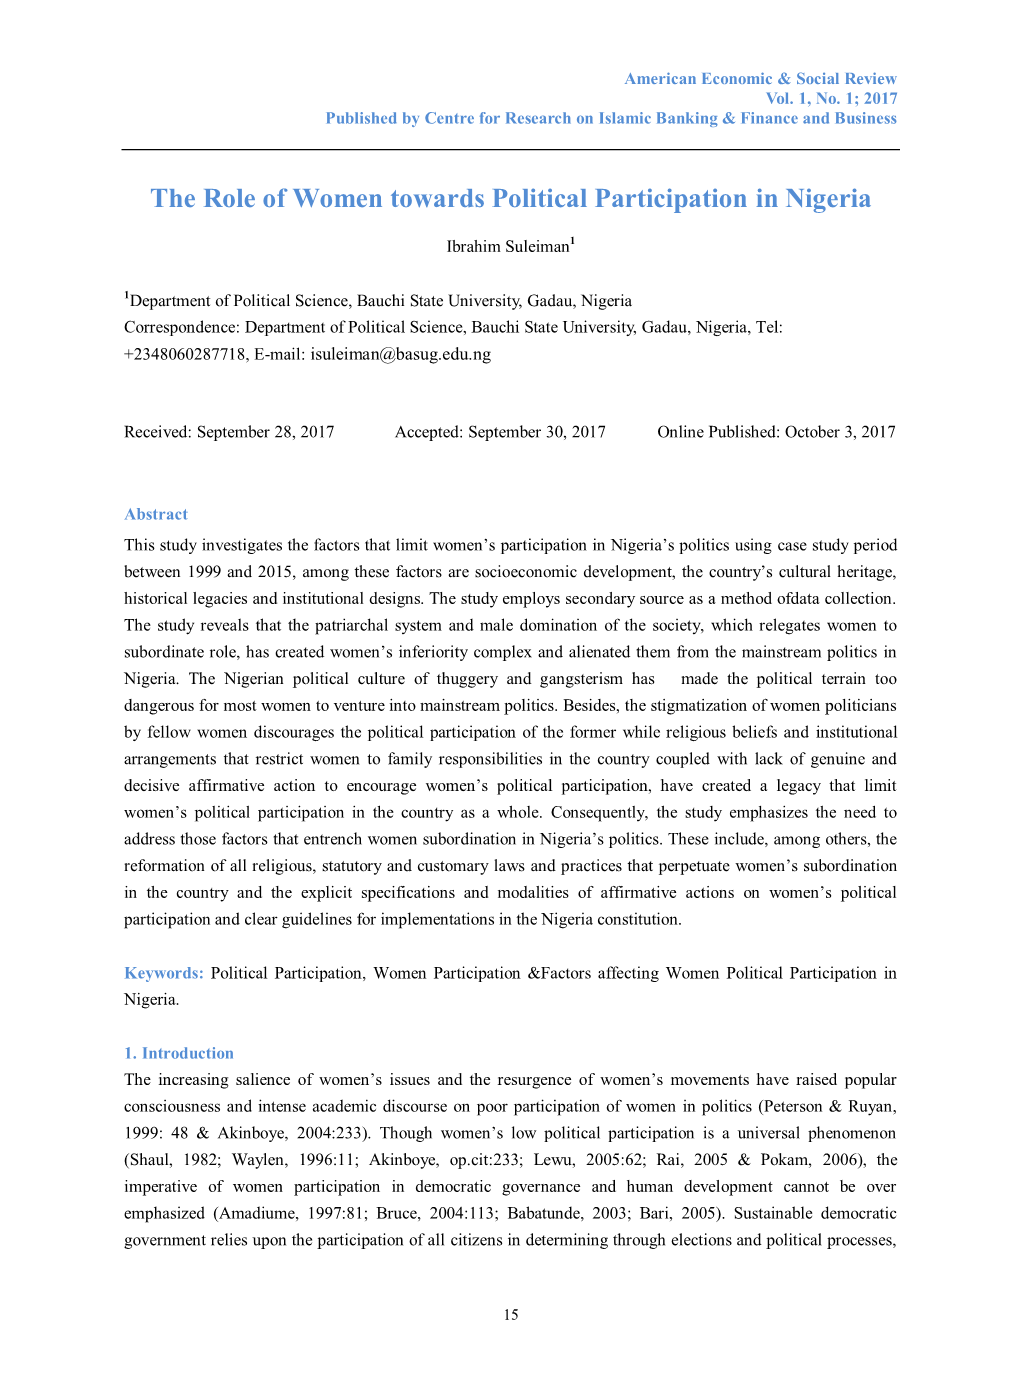 The Role of Women Towards Political Participation in Nigeria